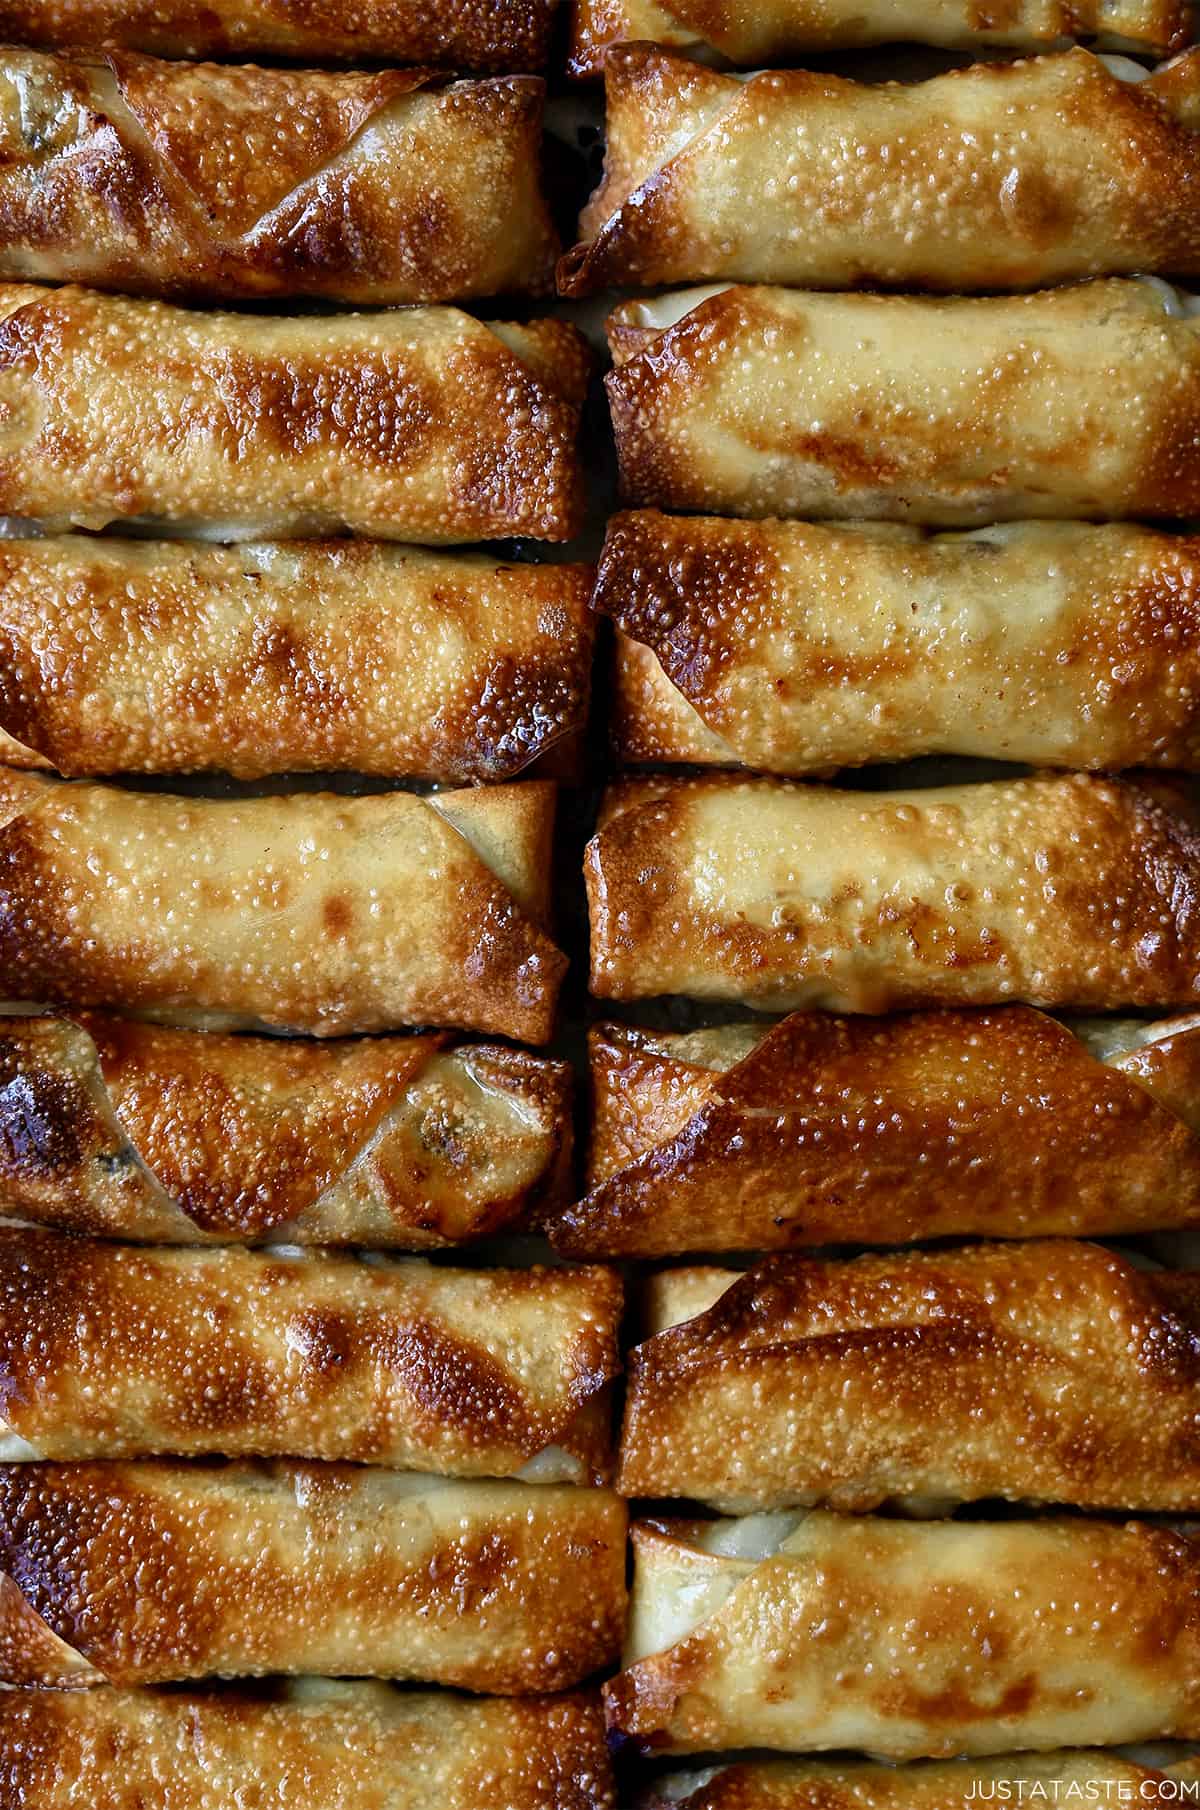 A close up view of air-fried spring rolls lined up on a baking sheet